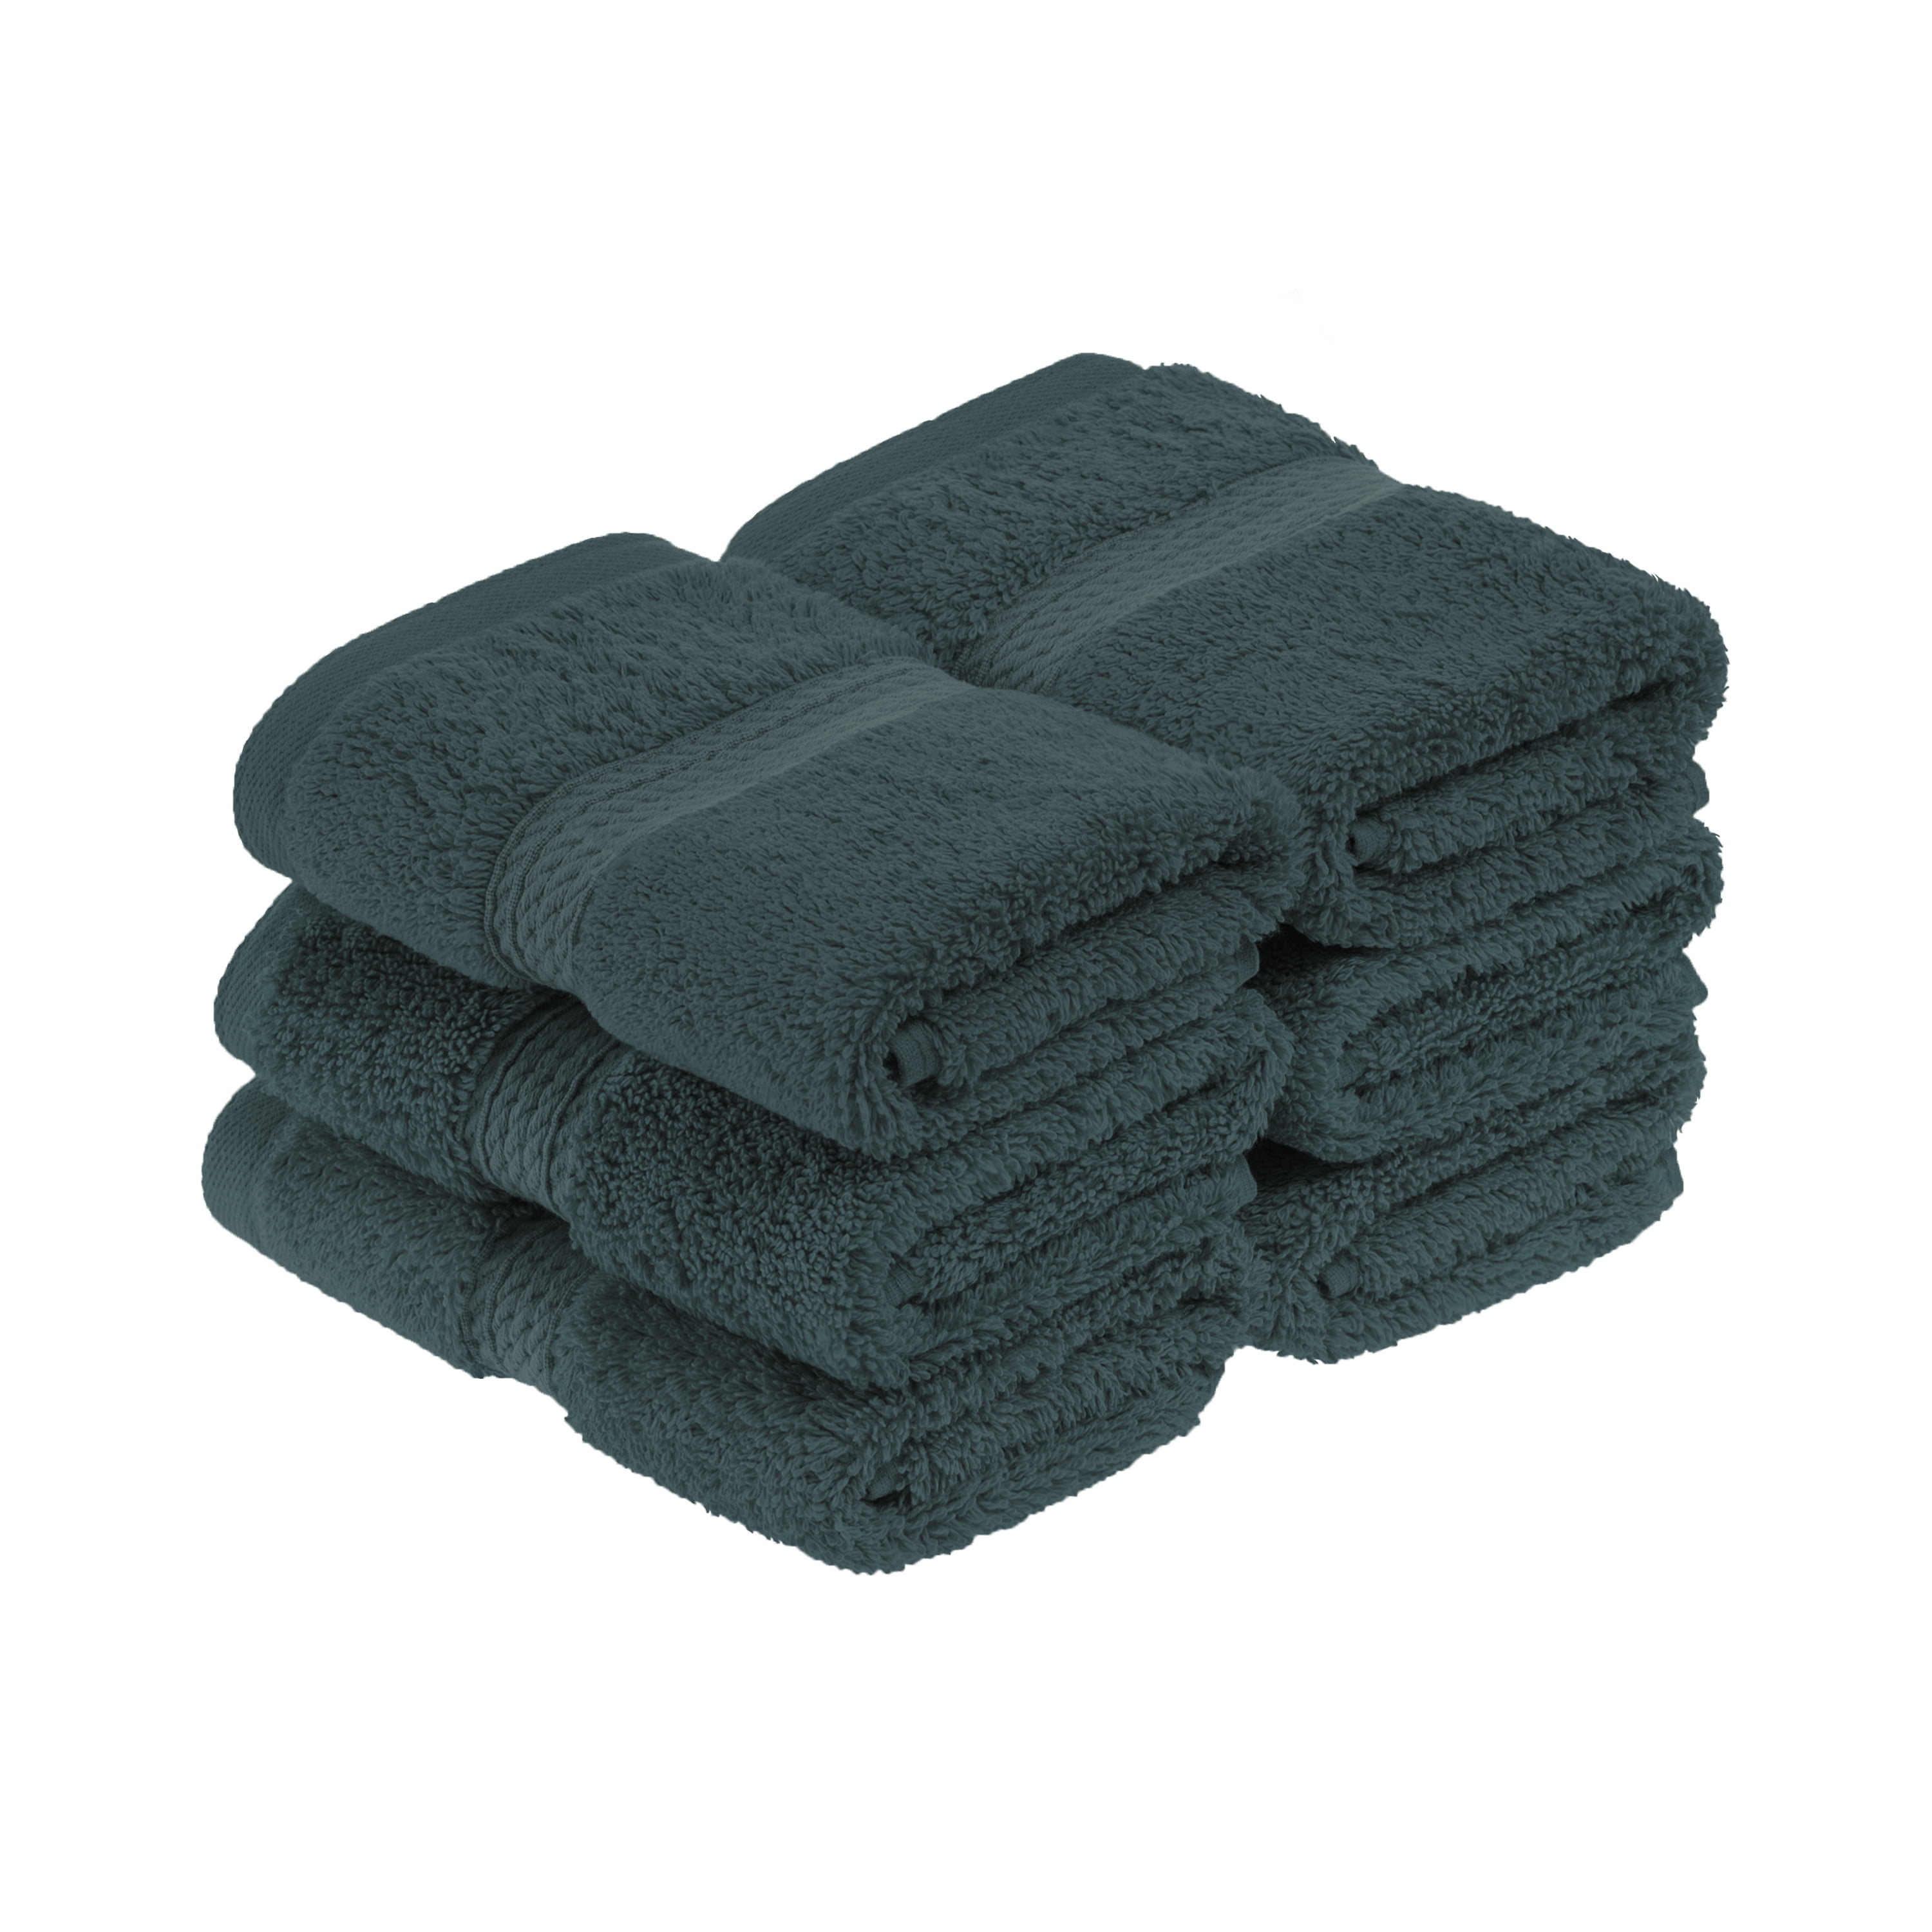 Superior 900GSM Egyptian Cotton 2-Piece Bath Towel Set Forest Green at